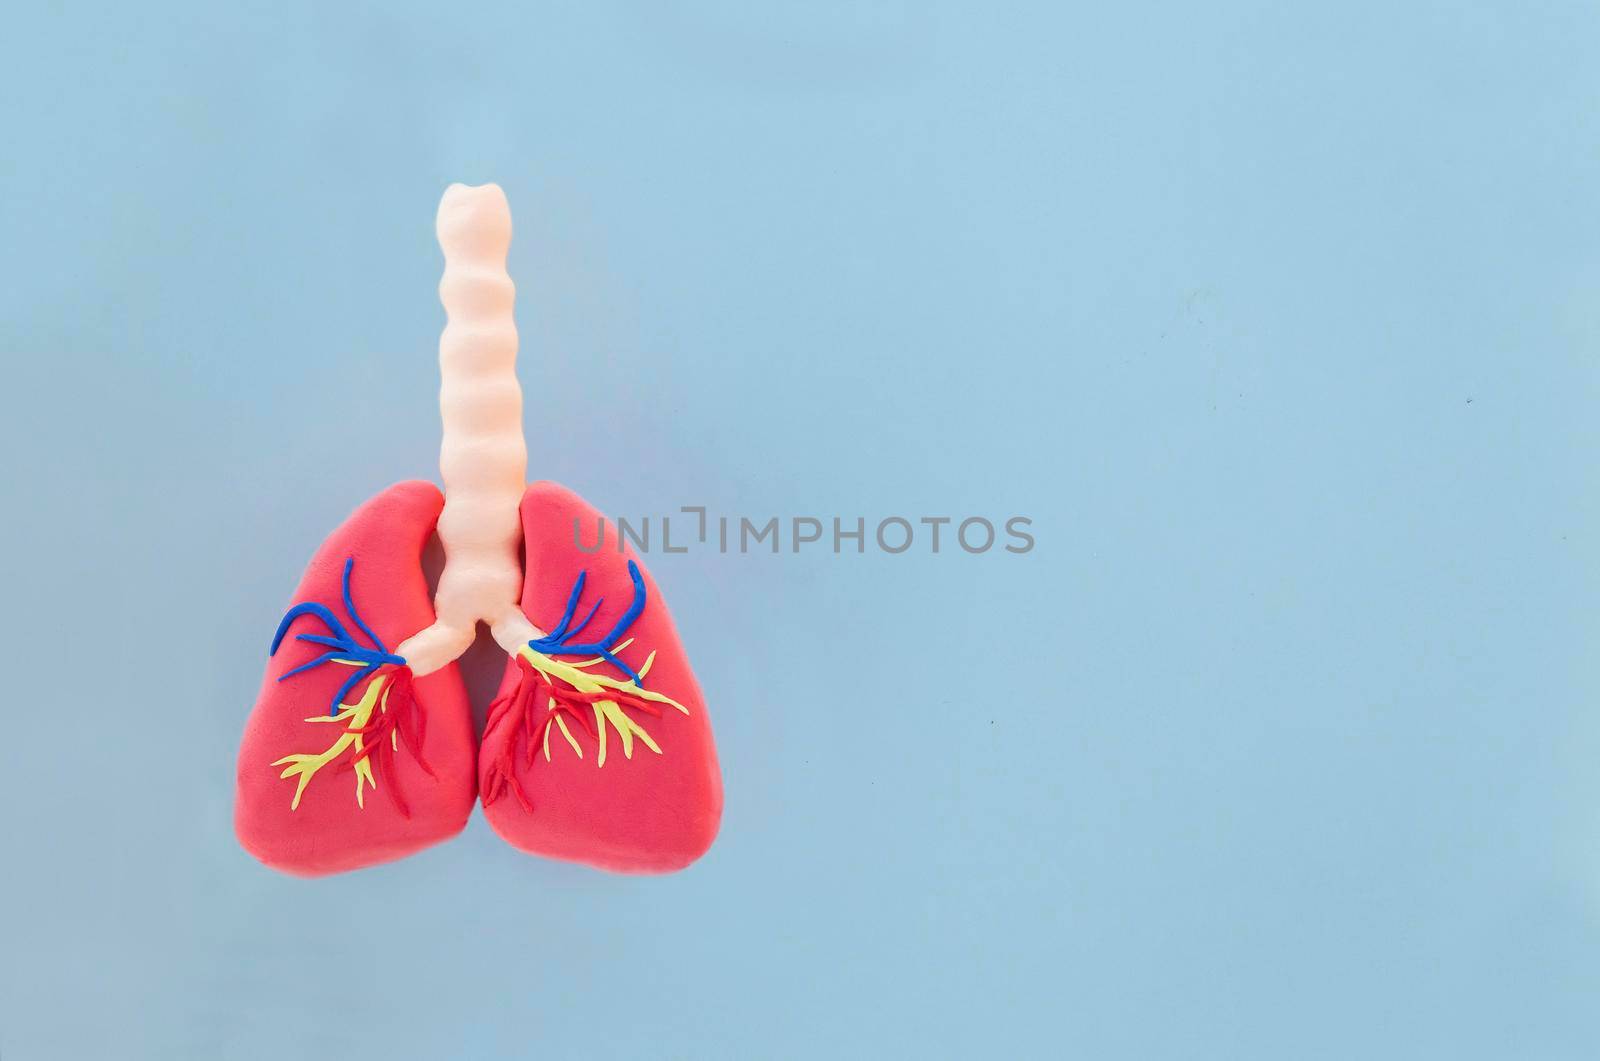 Toy lungs from plasticine on blue background.